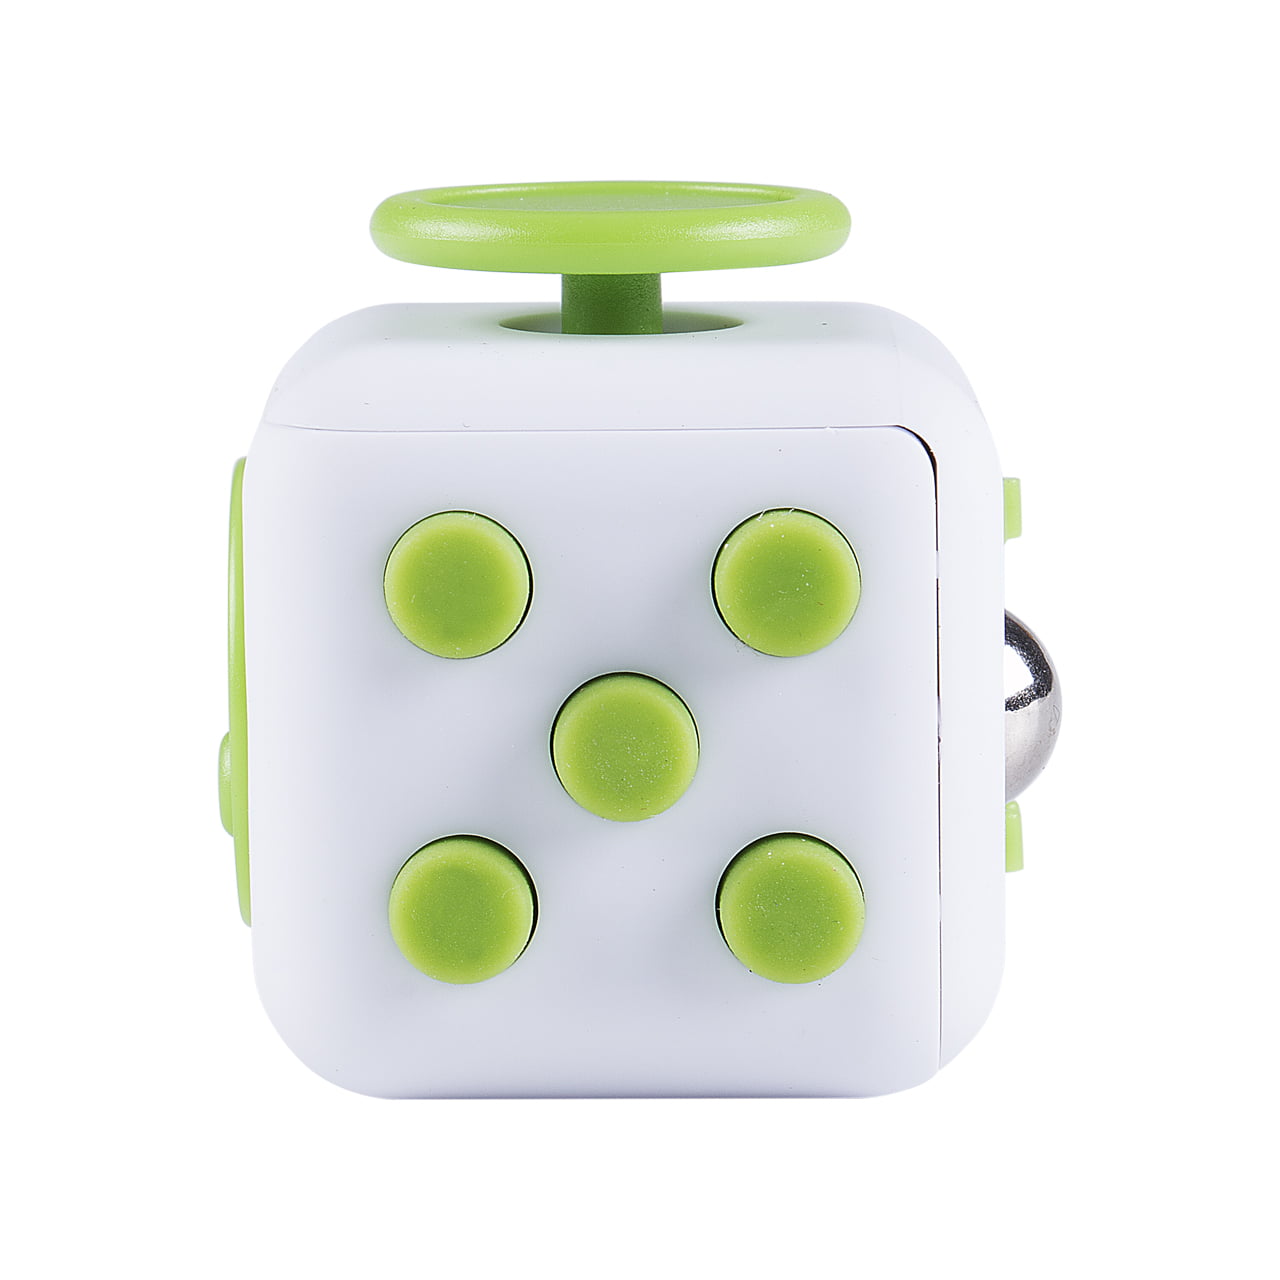 New White & Blue  Full Fidget Cube 6 side anxiety stress attention relief toy 